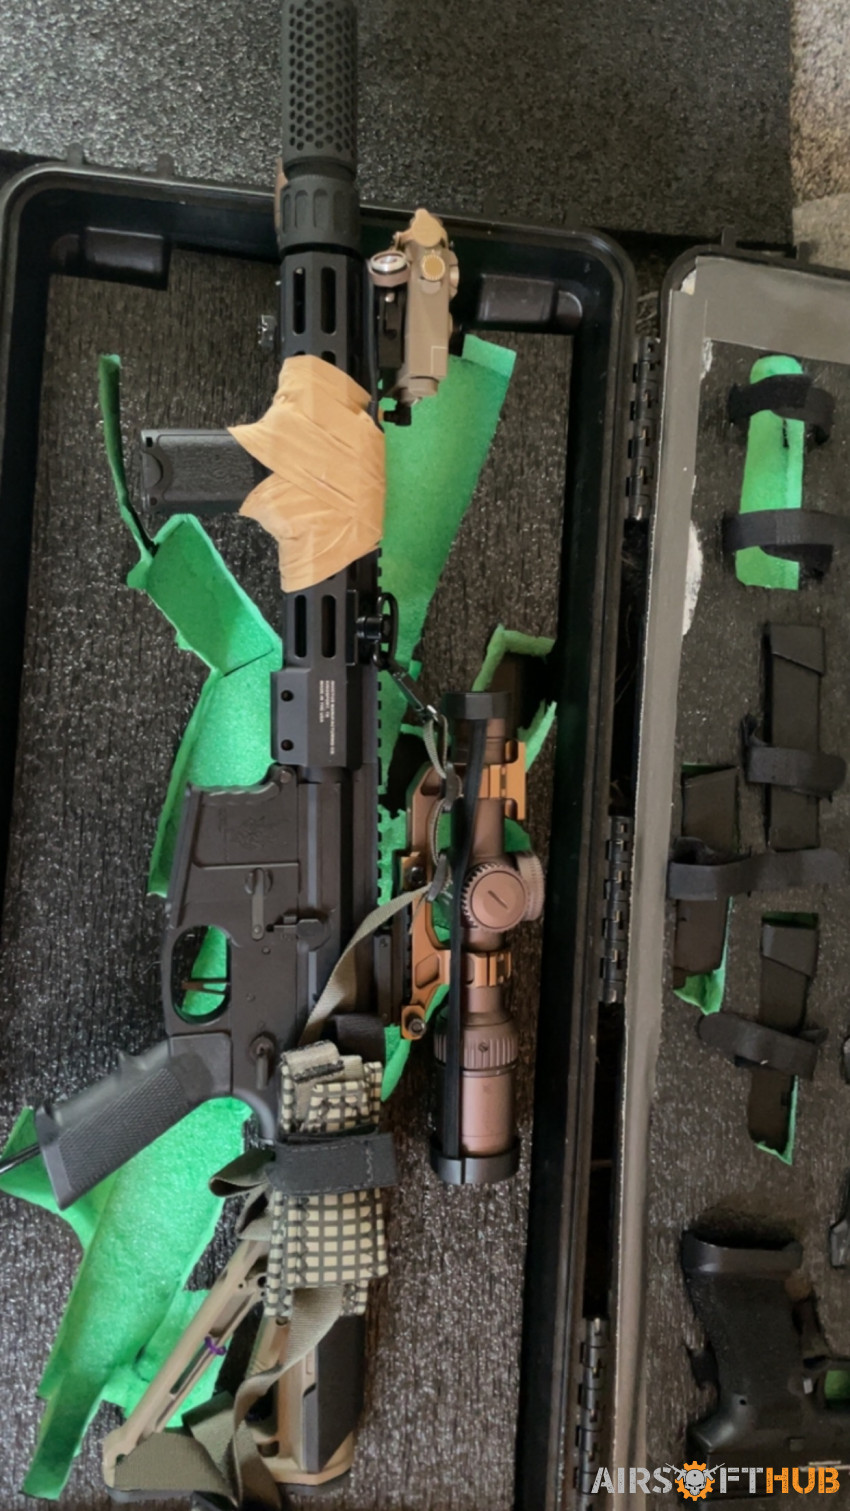 Airsoft budle - Used airsoft equipment